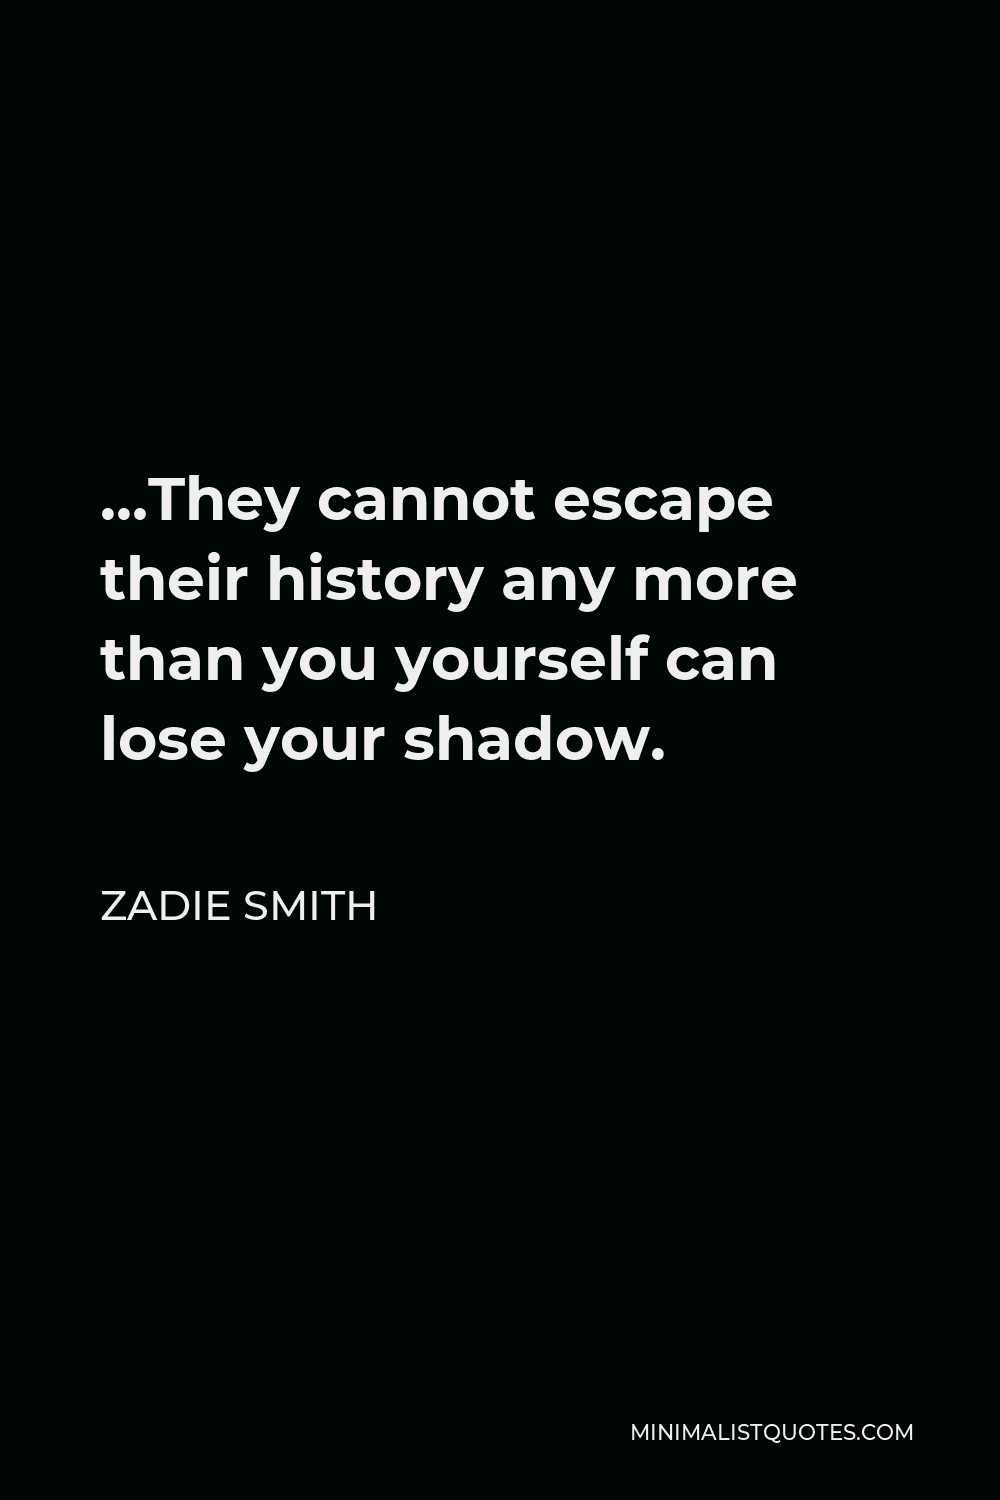 Zadie Smith Quote - …They cannot escape their history any more than you yourself can lose your shadow.